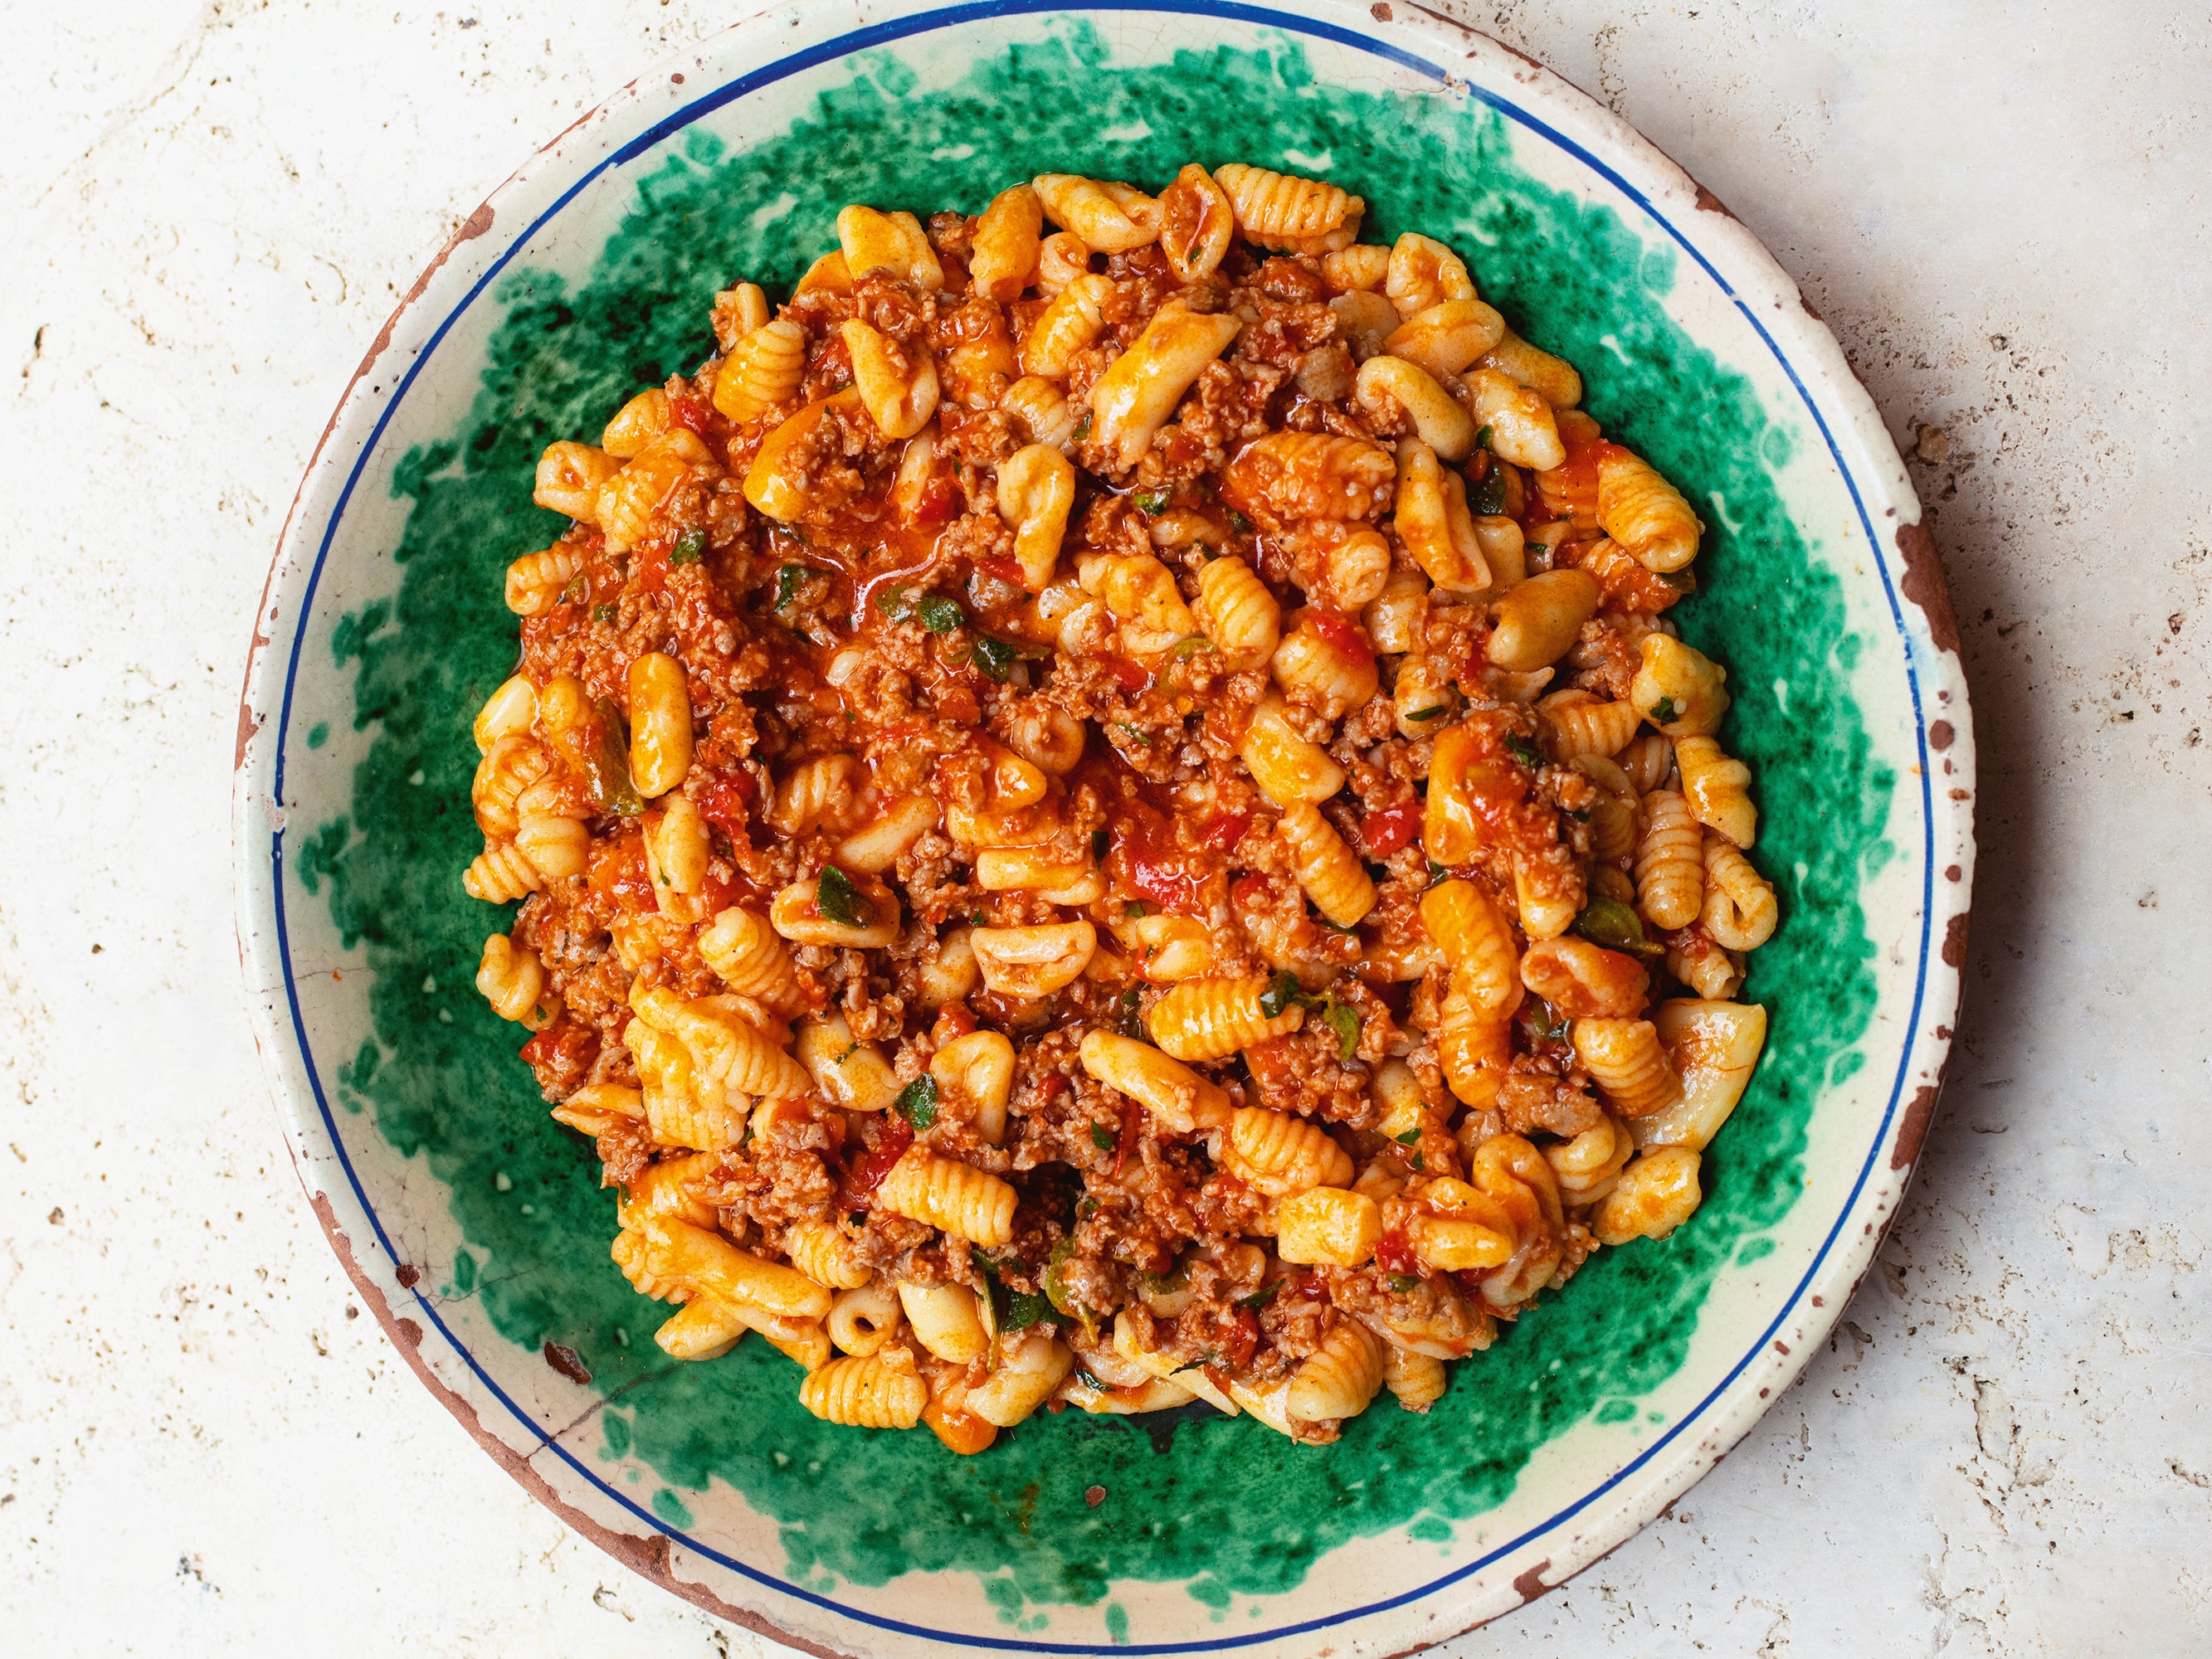 Cavatelli with sausage, mint and tomato: a swift, simple and satisfying mid-week pasta dish